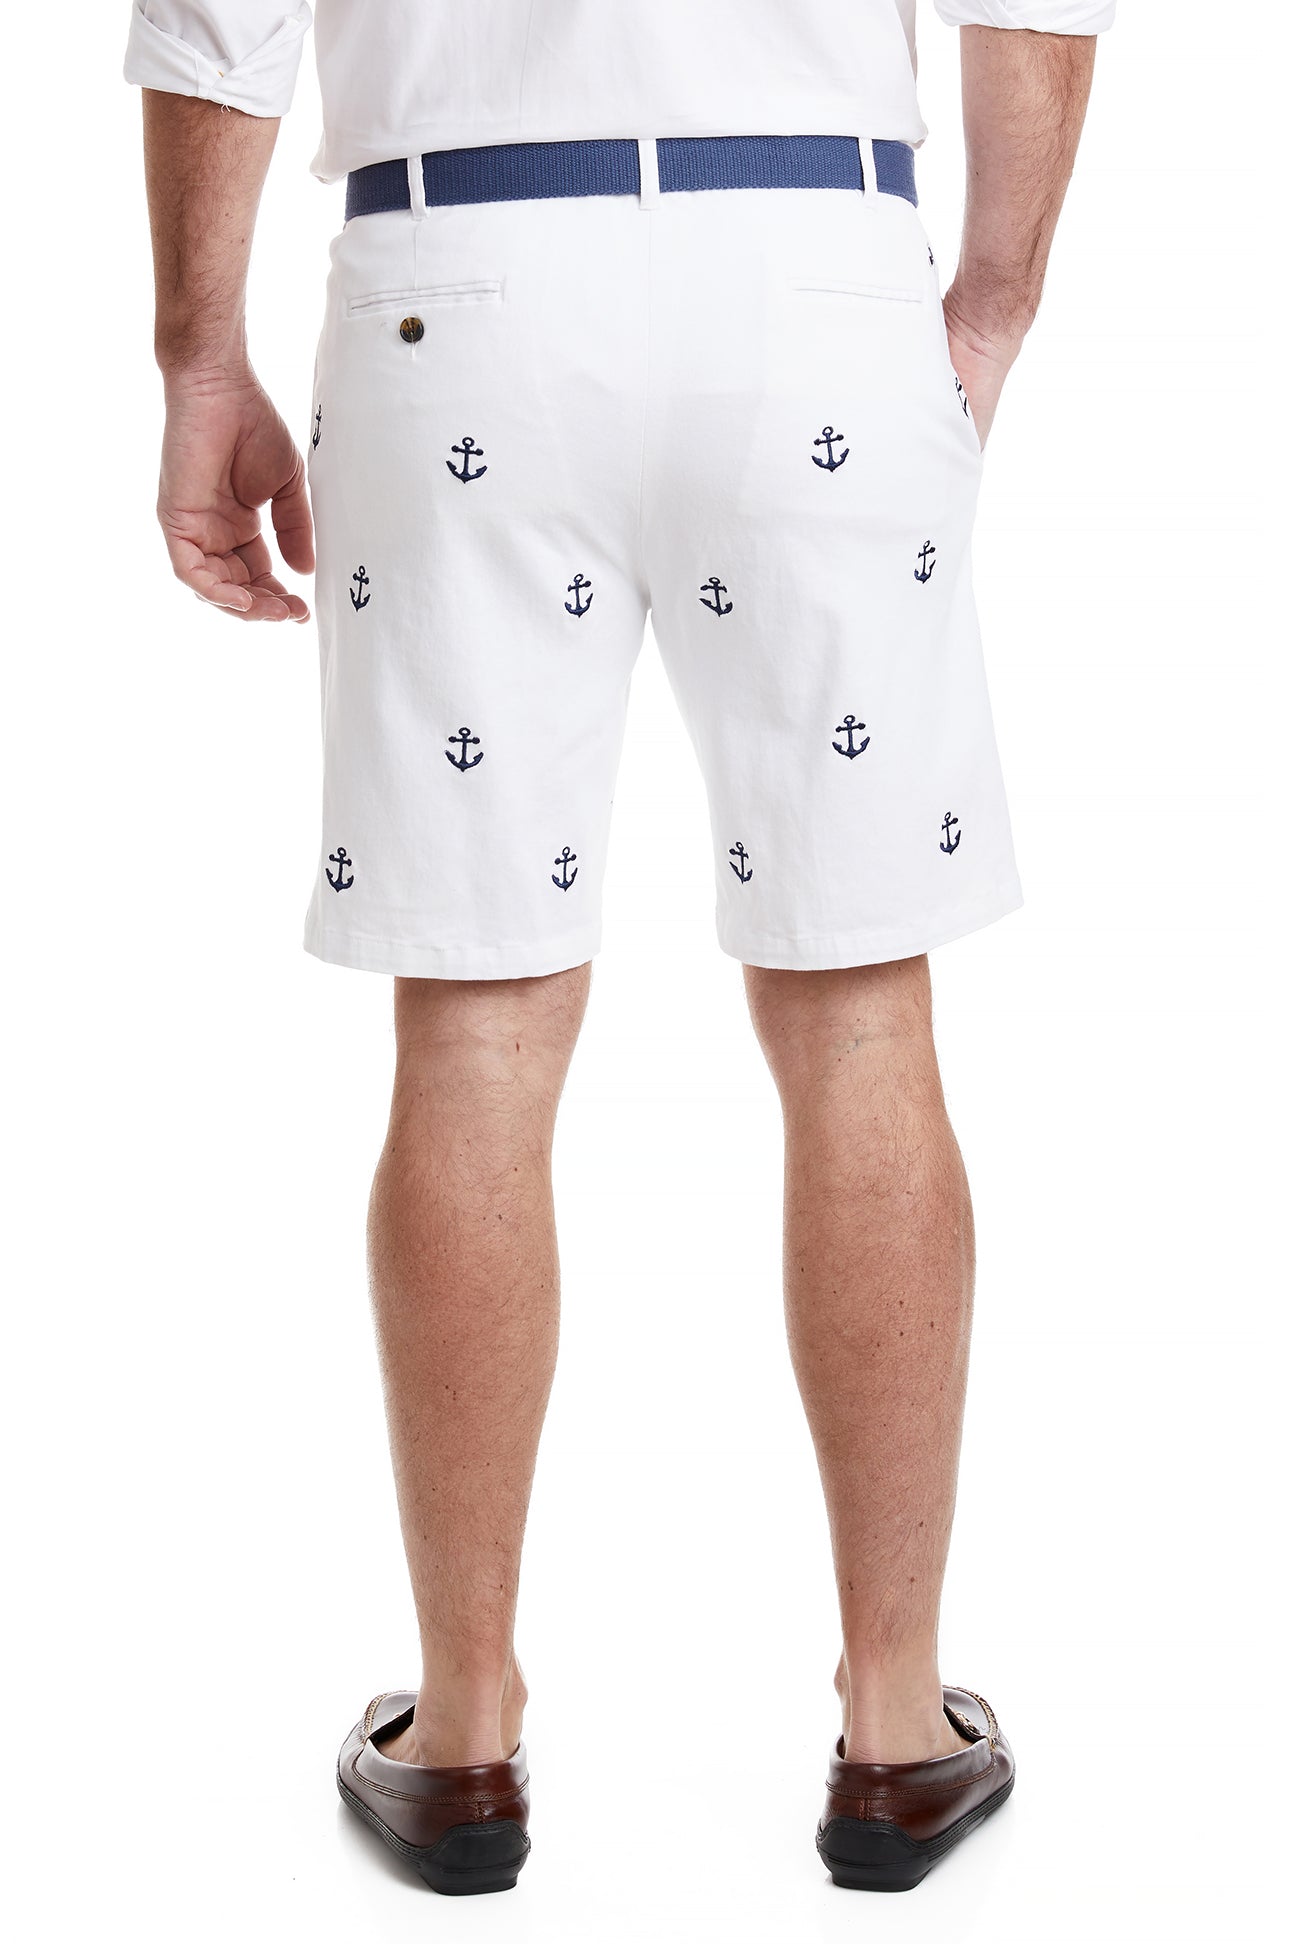 Cisco Short Stretch Twill White with Anchor MENS EMBROIDERED SHORTS Castaway Nantucket Island